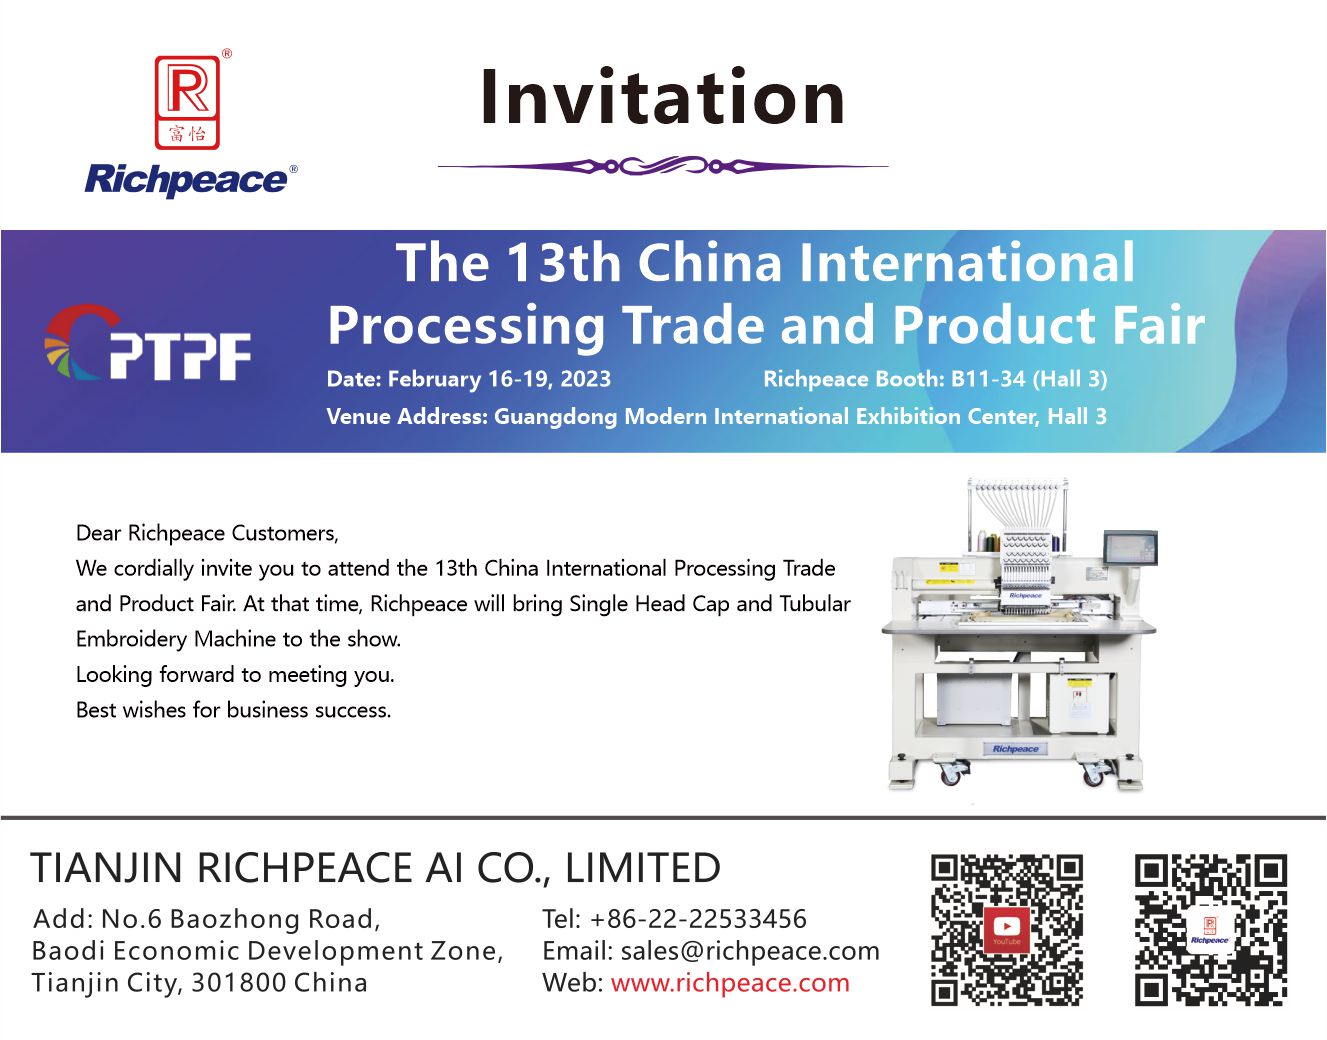 The 13th China International Processing Trade and Product Fair